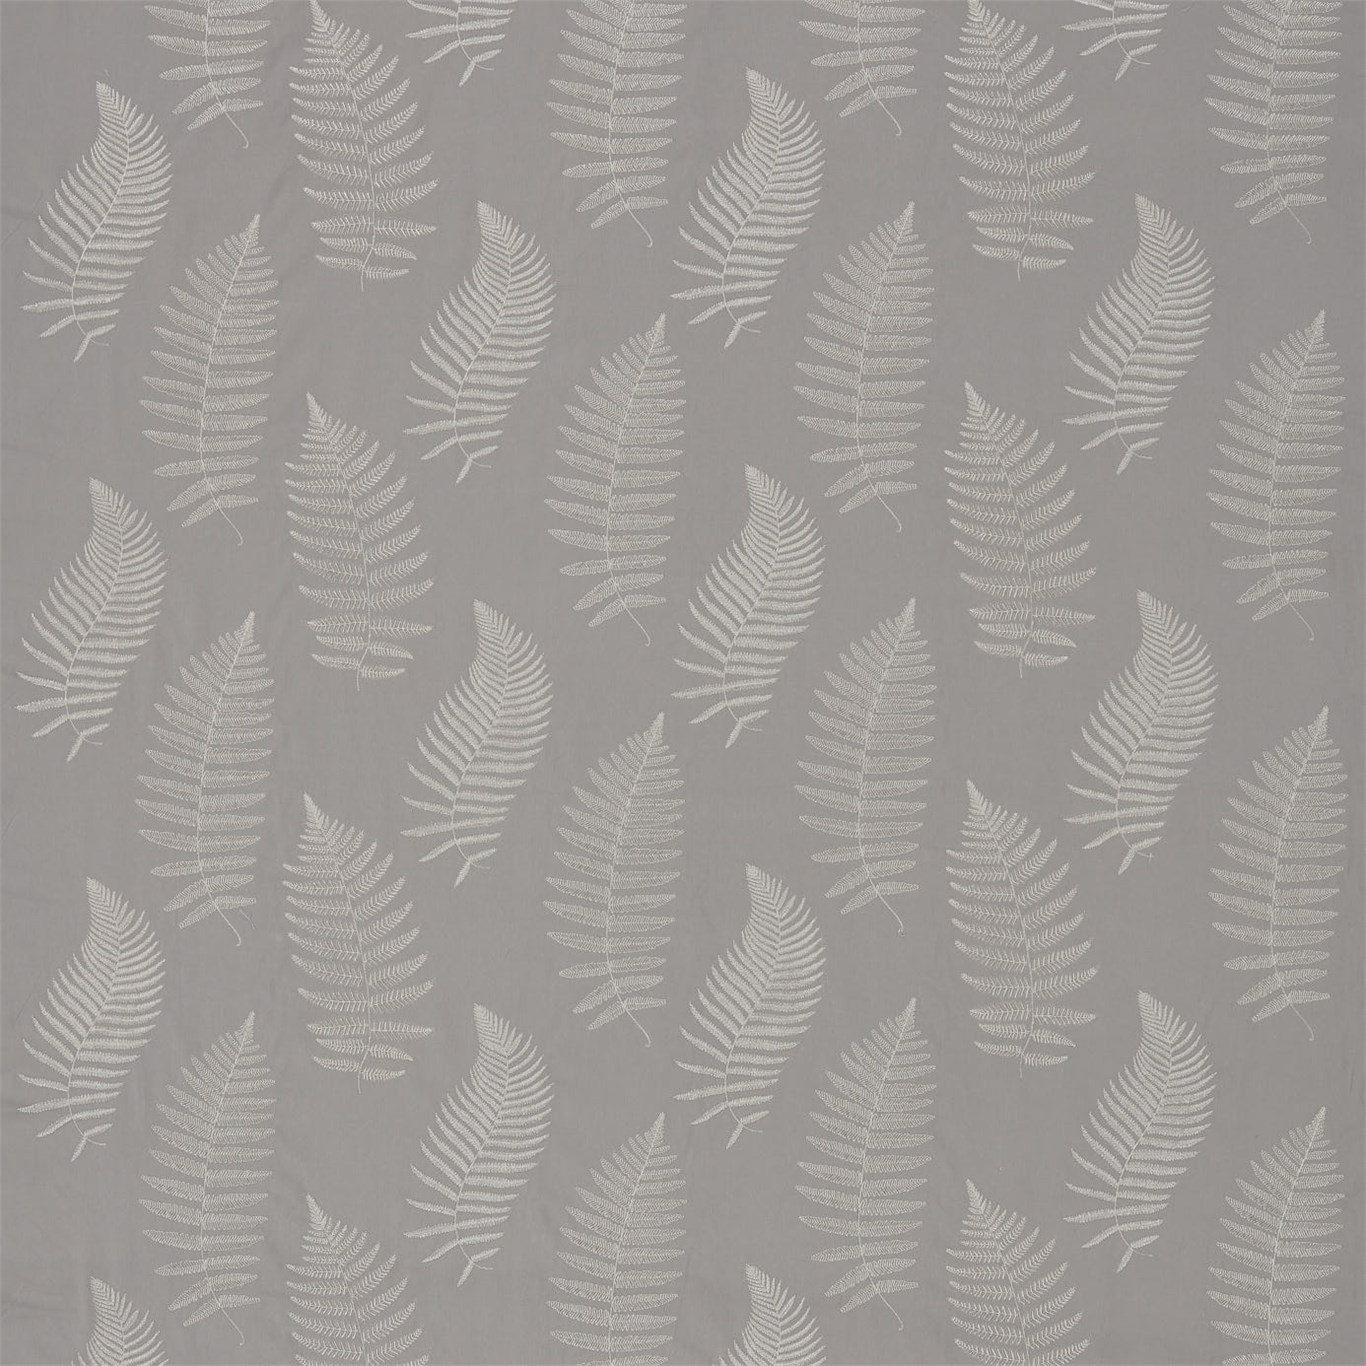 Fern Embroidery Pebble Fabric by SAN